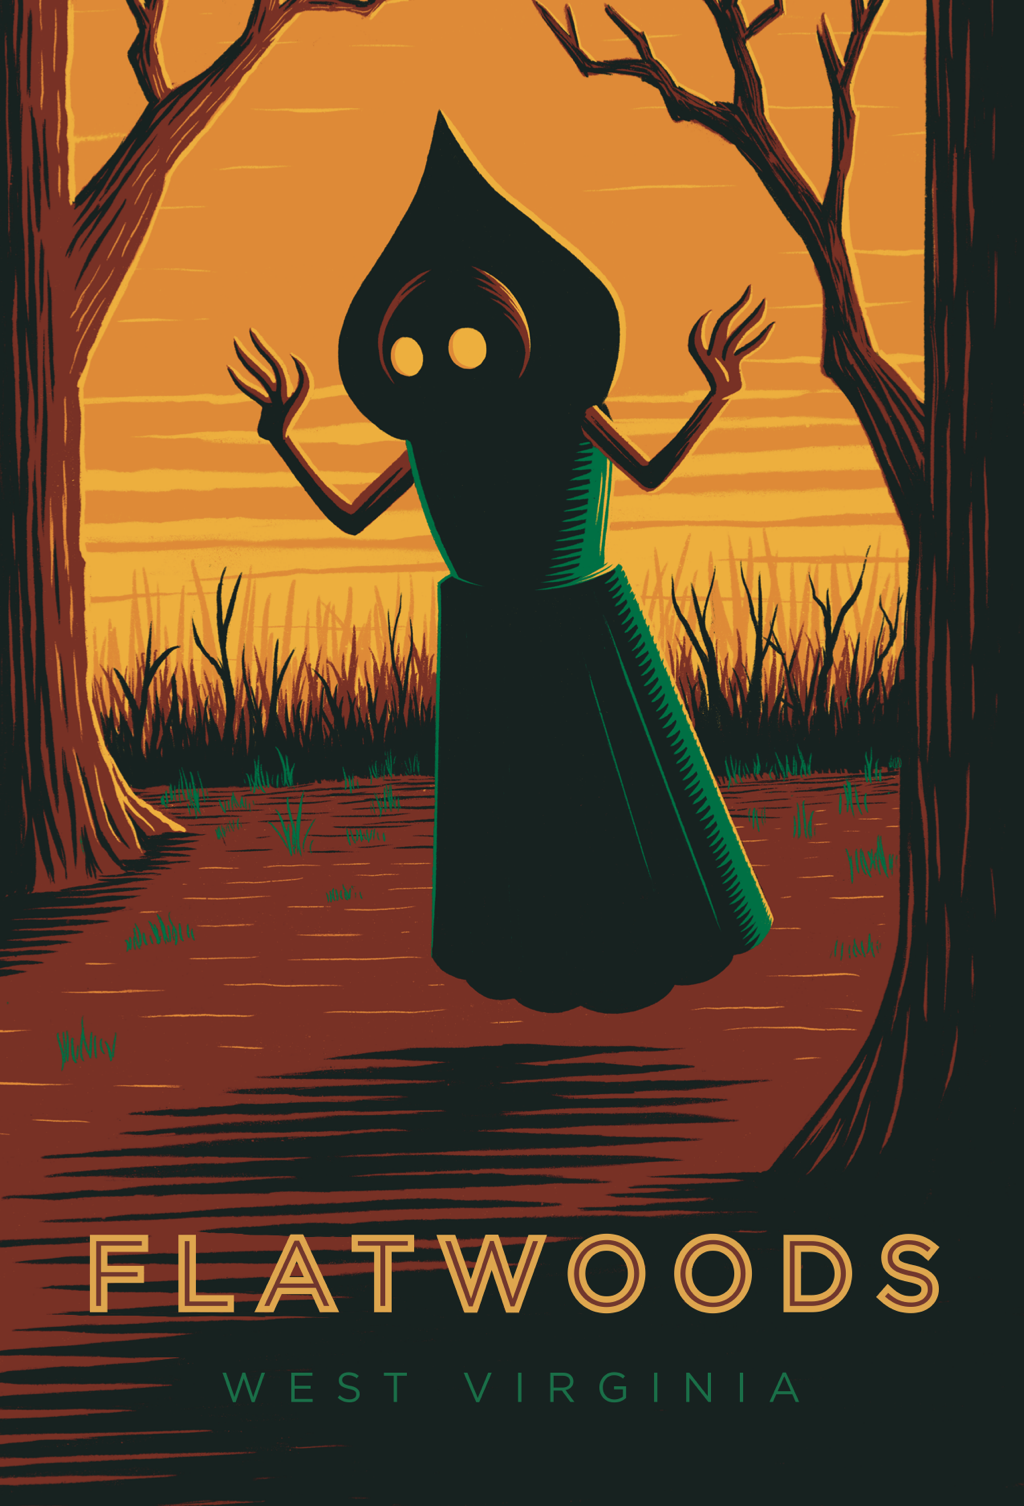 Flatwoods West Virginia Travel Poster 4x6